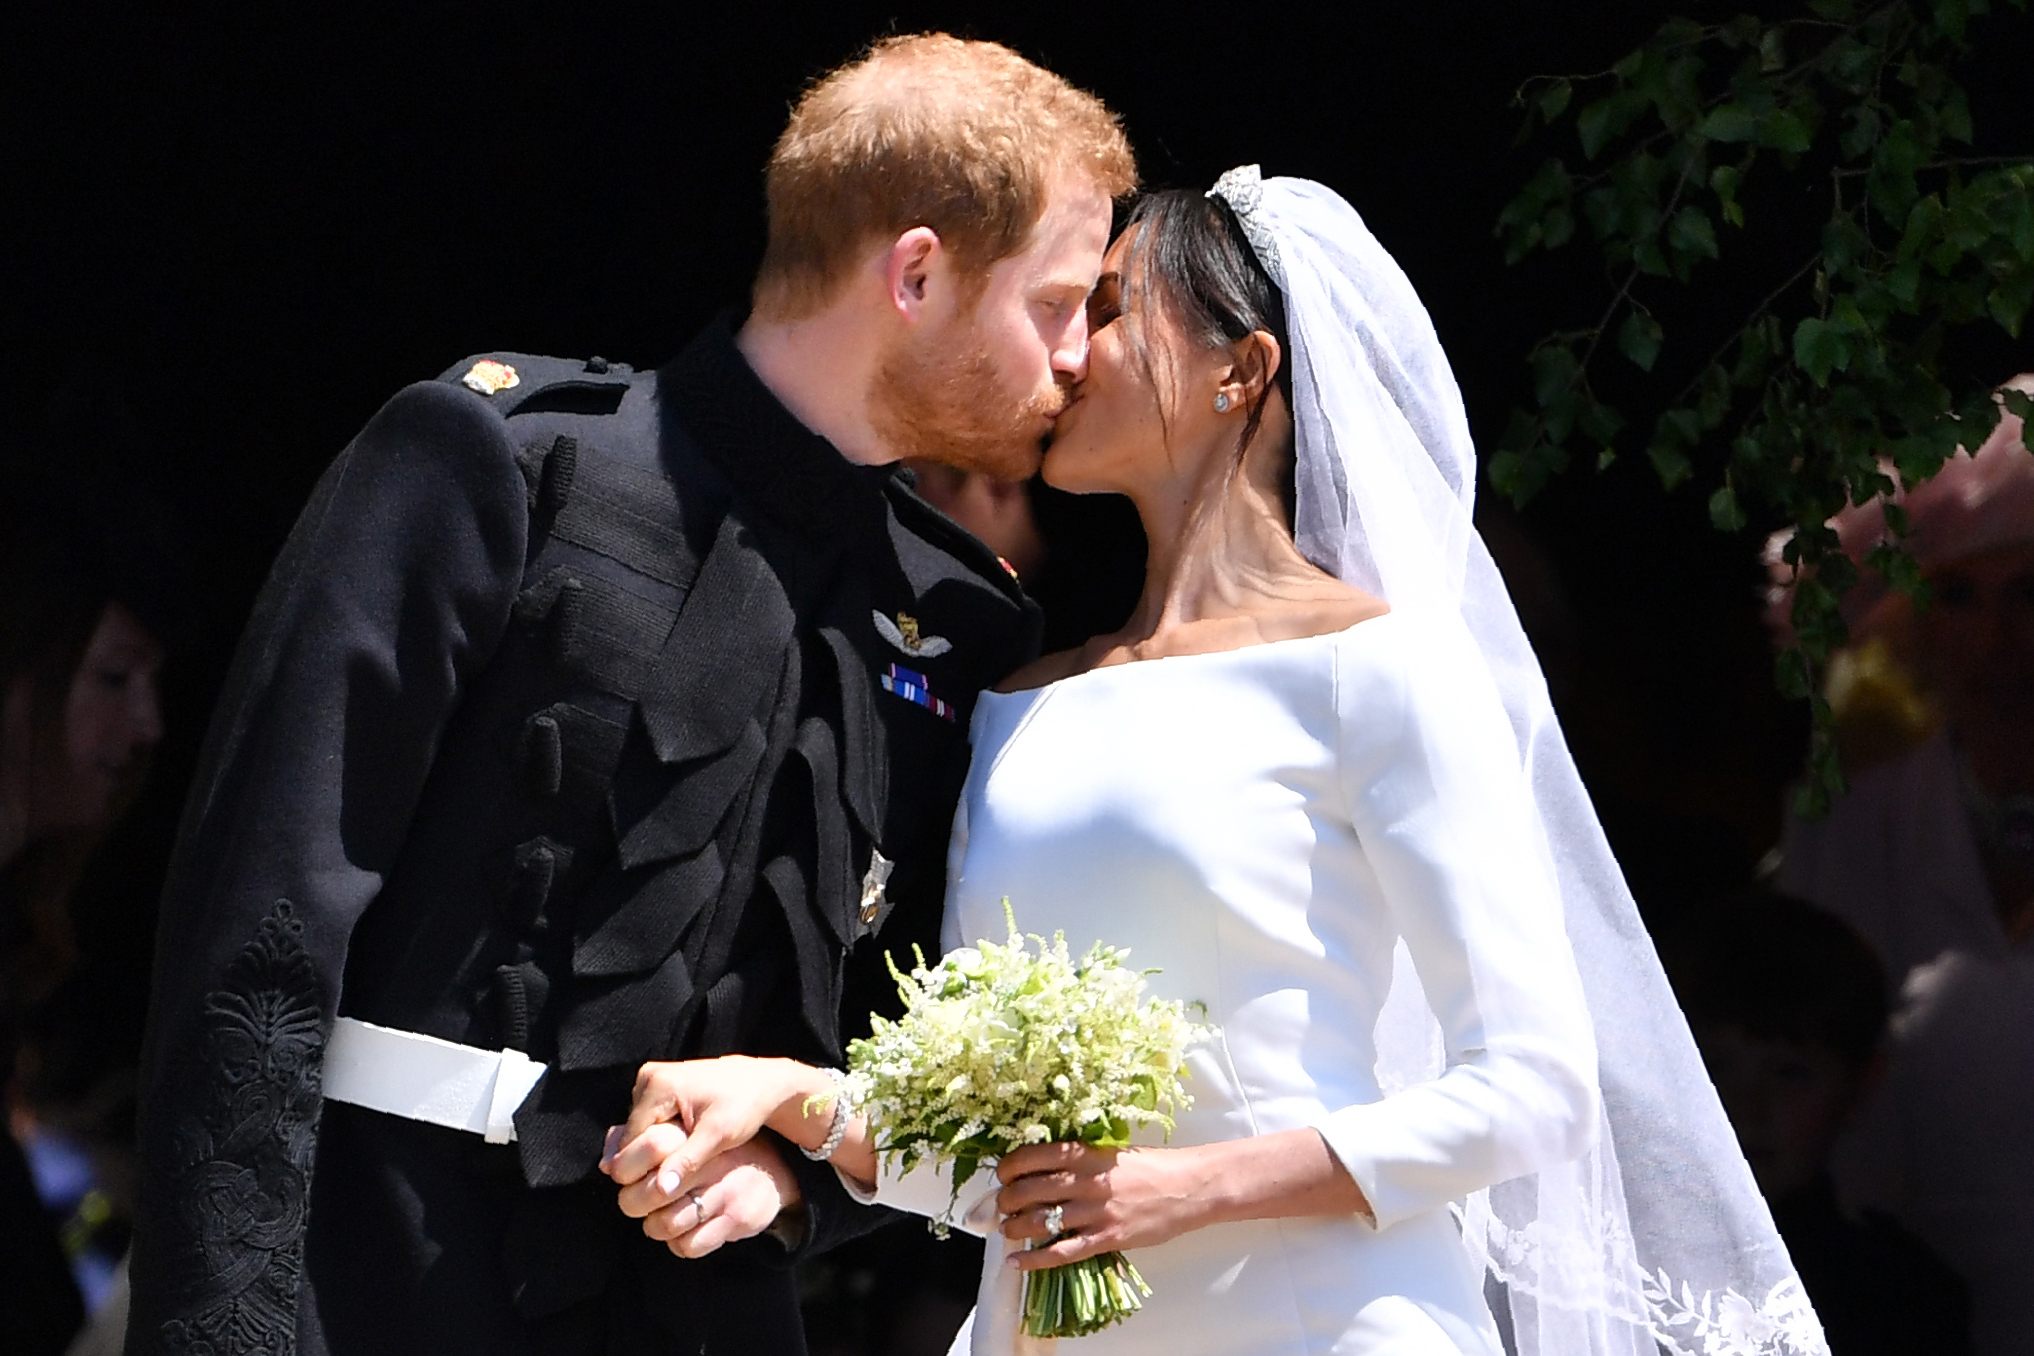 Prince Harry, Duke of Sussex kisses Meghan, Duchess of Sussex outside St George's Chapel in Windsor Castle, England, on May 19, 2018. | Source: Getty Images